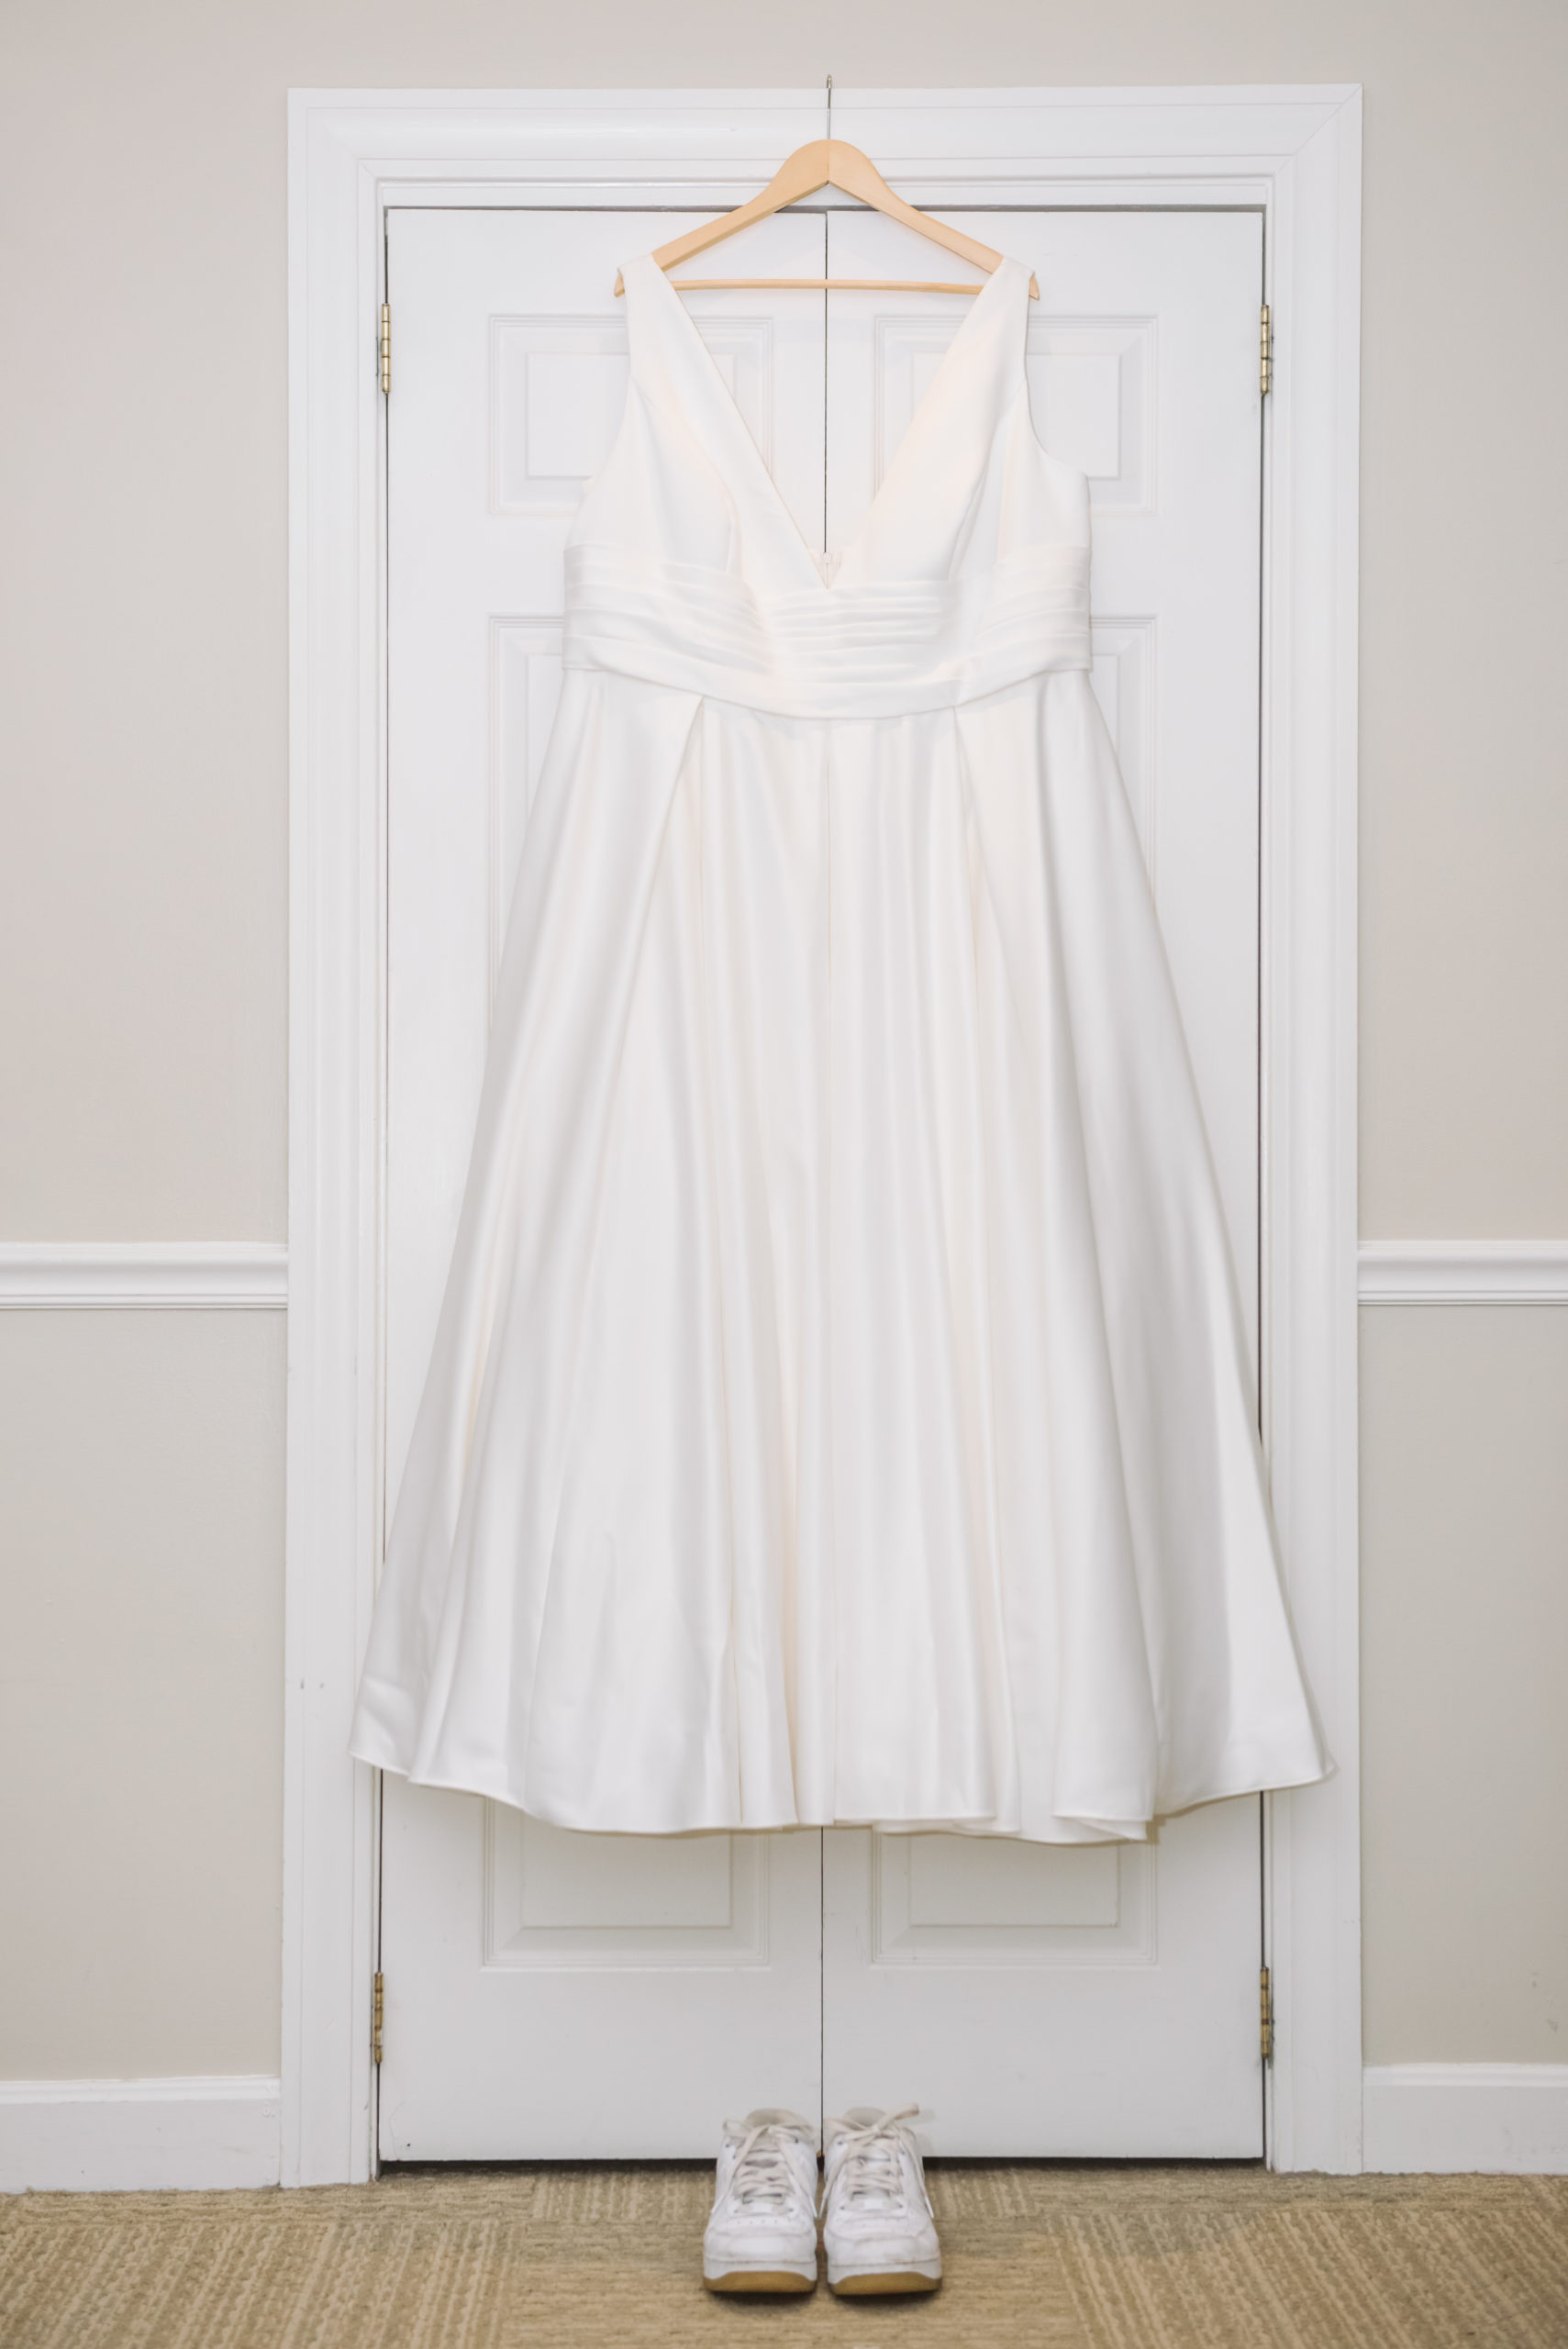 Bride's reception gown hanging on a light wooden hanger on a white closet door. It is a deep v-neck full-length gown with no train. Her reception shoes are set below the dress. They are air force one white sneakers.